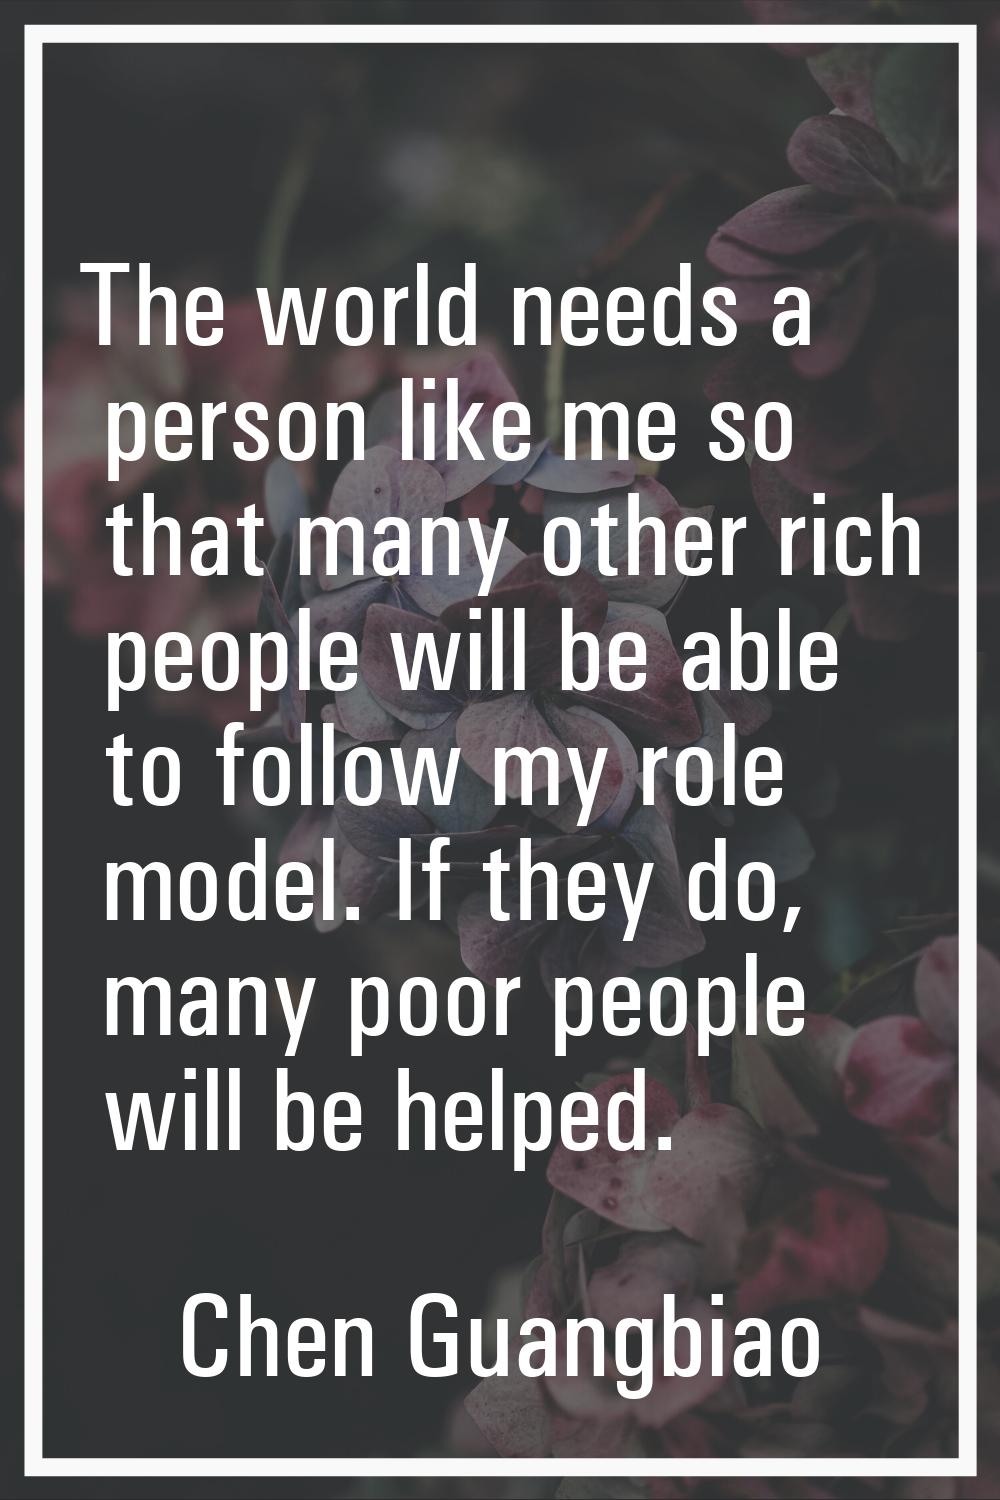 The world needs a person like me so that many other rich people will be able to follow my role mode